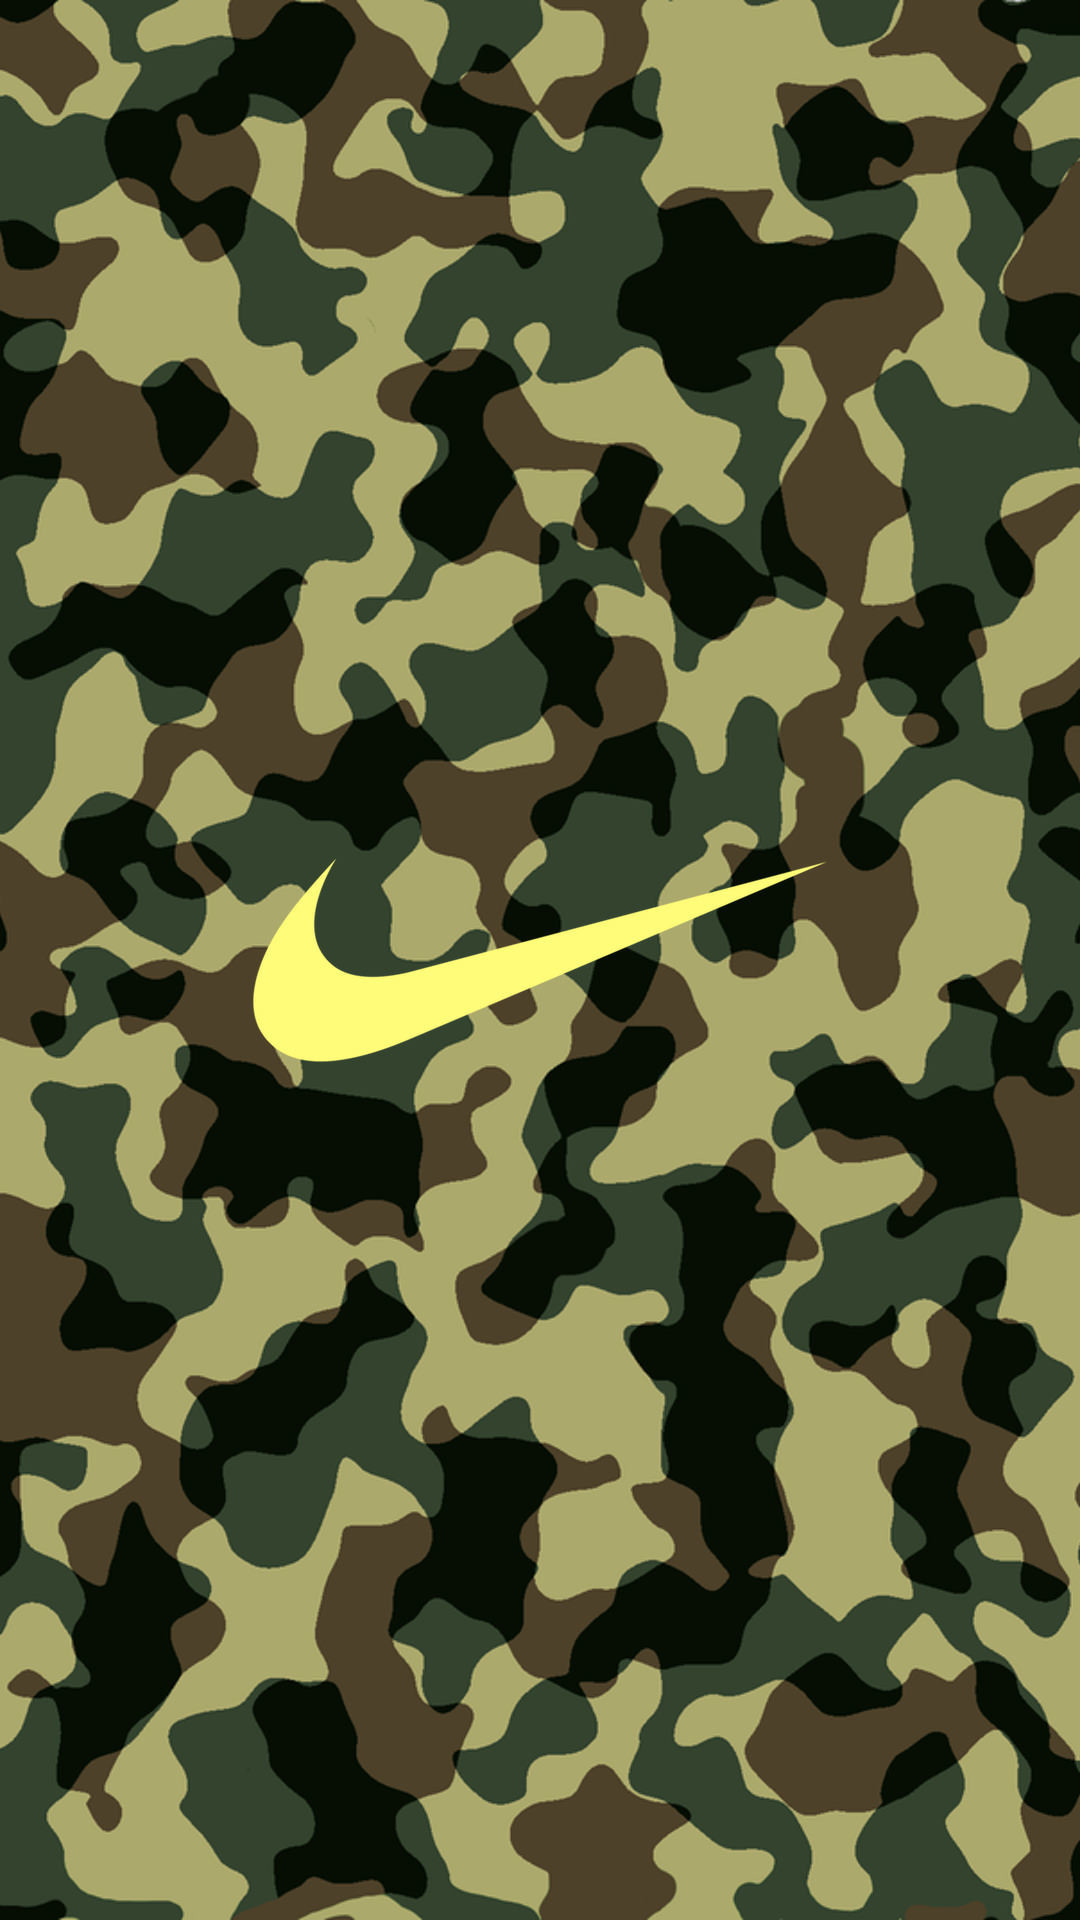 1080x1920 Camouflage wallpaper for iPhone or Android. Tags: camo, hunting